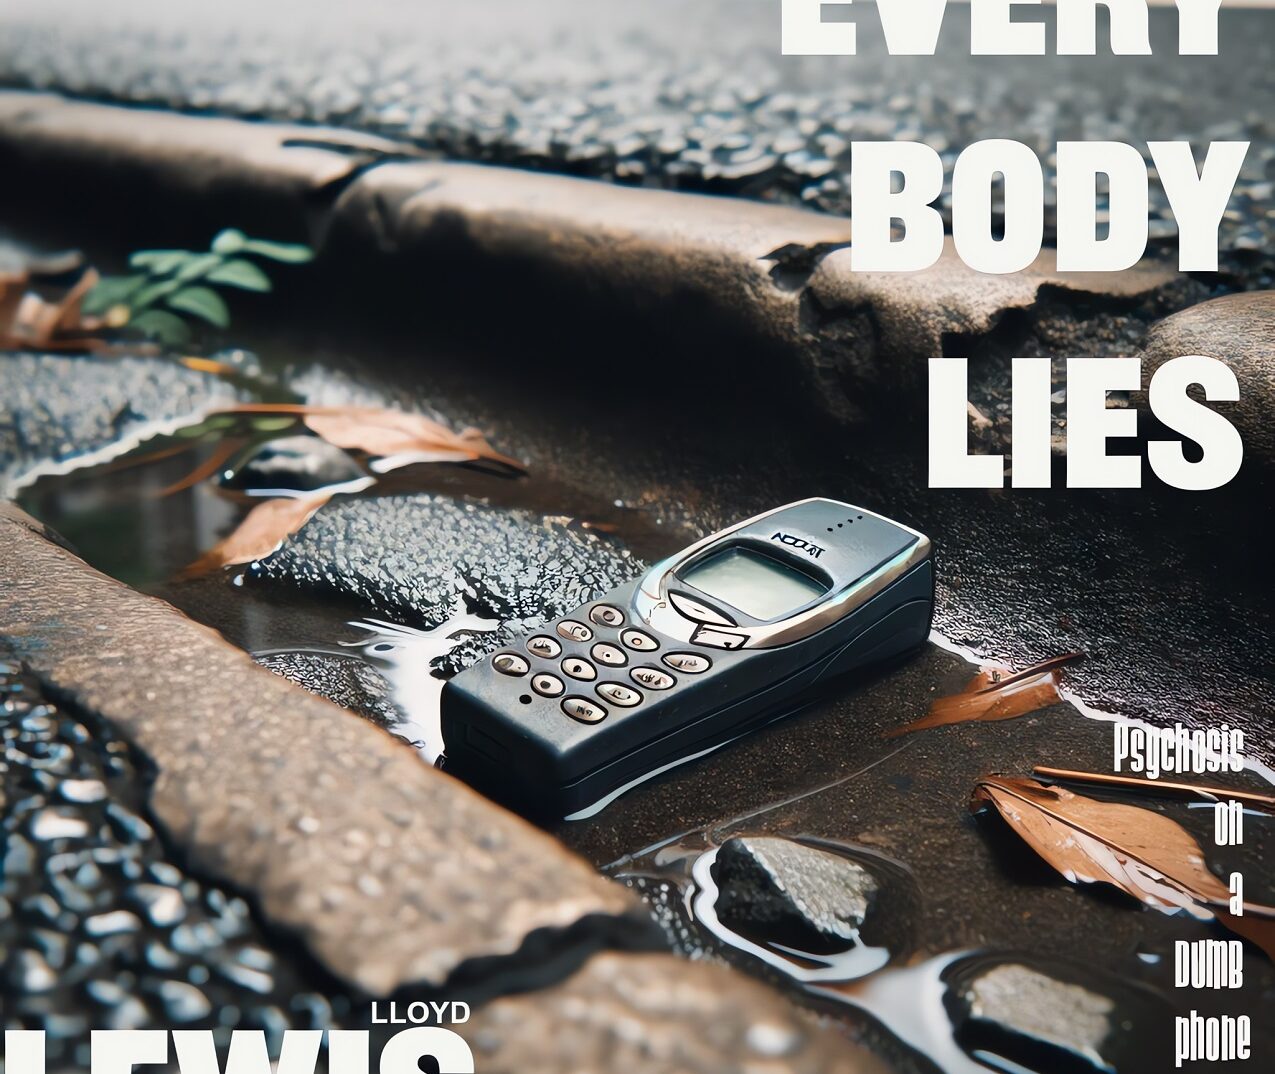 Lloyd Lewis ft MSUX – Every Body Lies – new song